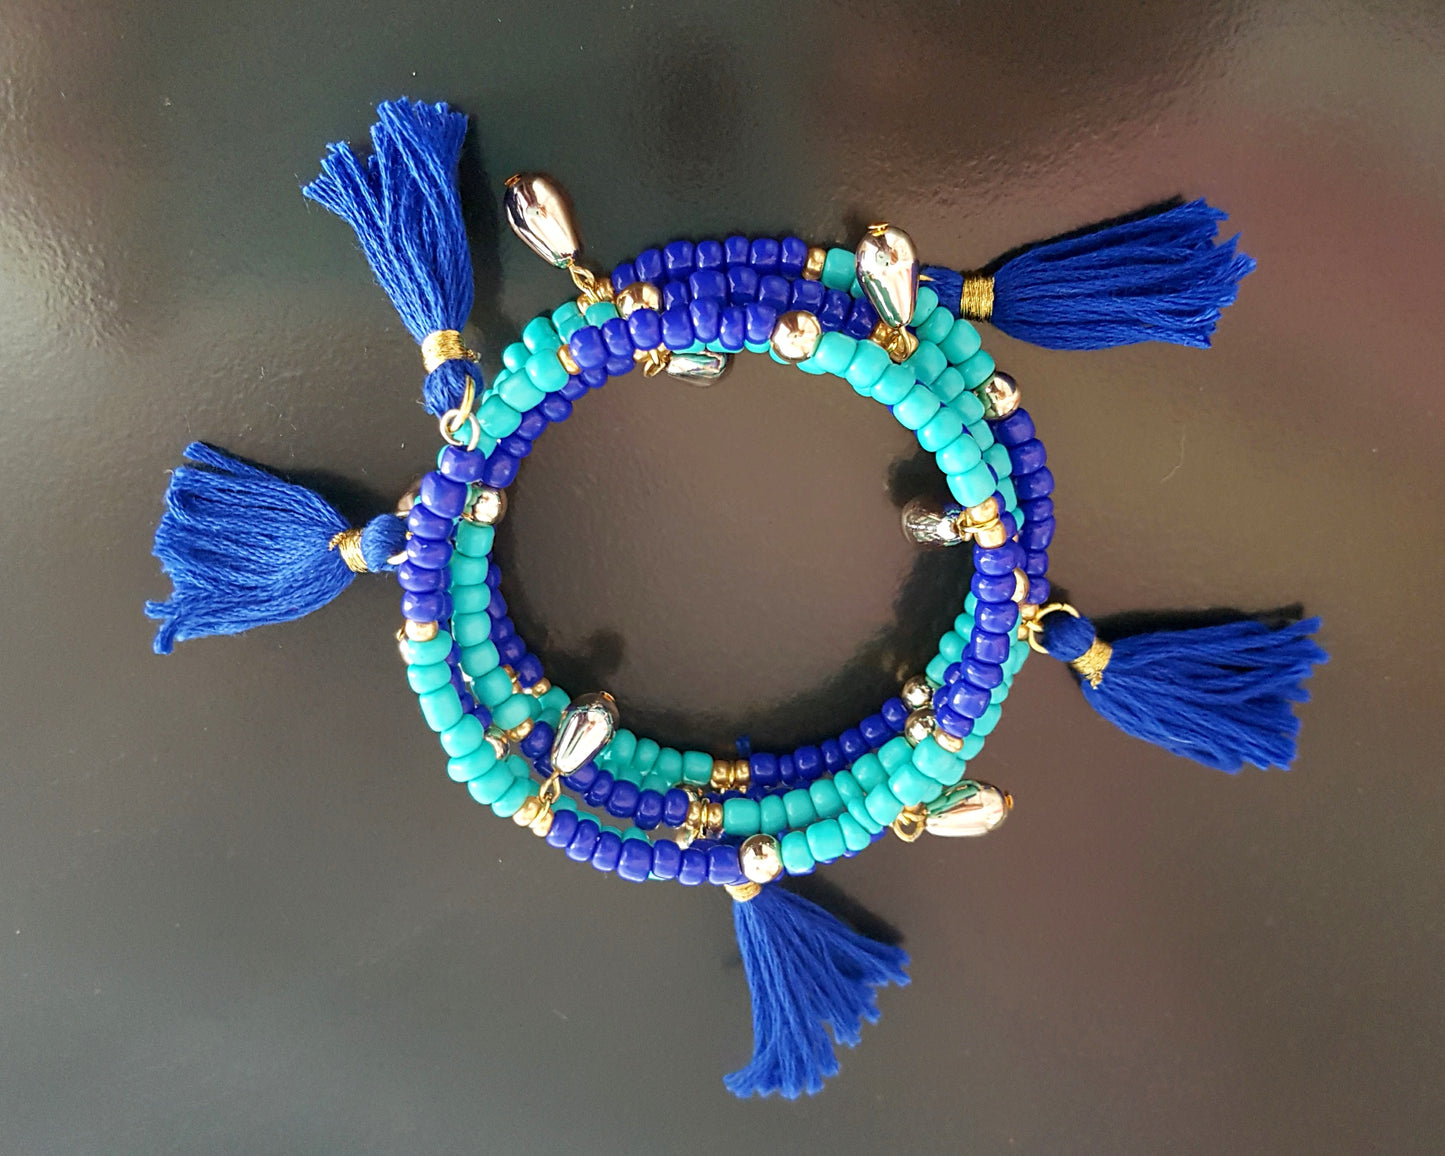 Blue Tassel Wrap Bracelet made with turquoise and cobalt blue glass beads, vintage gold tone beads and blue tassels on memory wire.